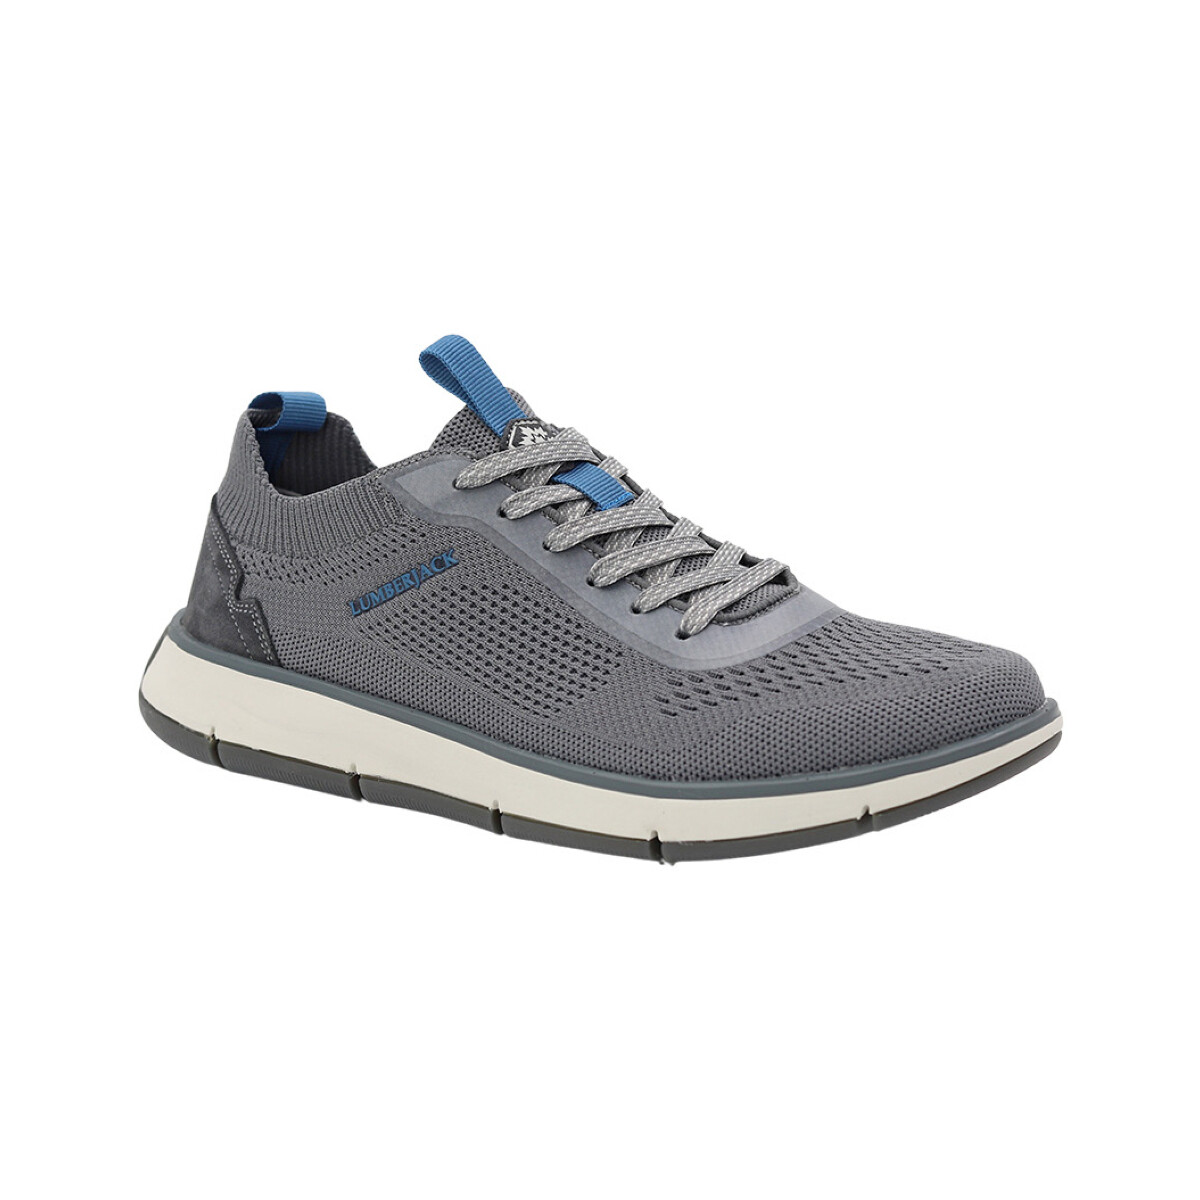 Chaussures Homme Gagnez 10 euros SMG8912-003-C27-CD003 Gris